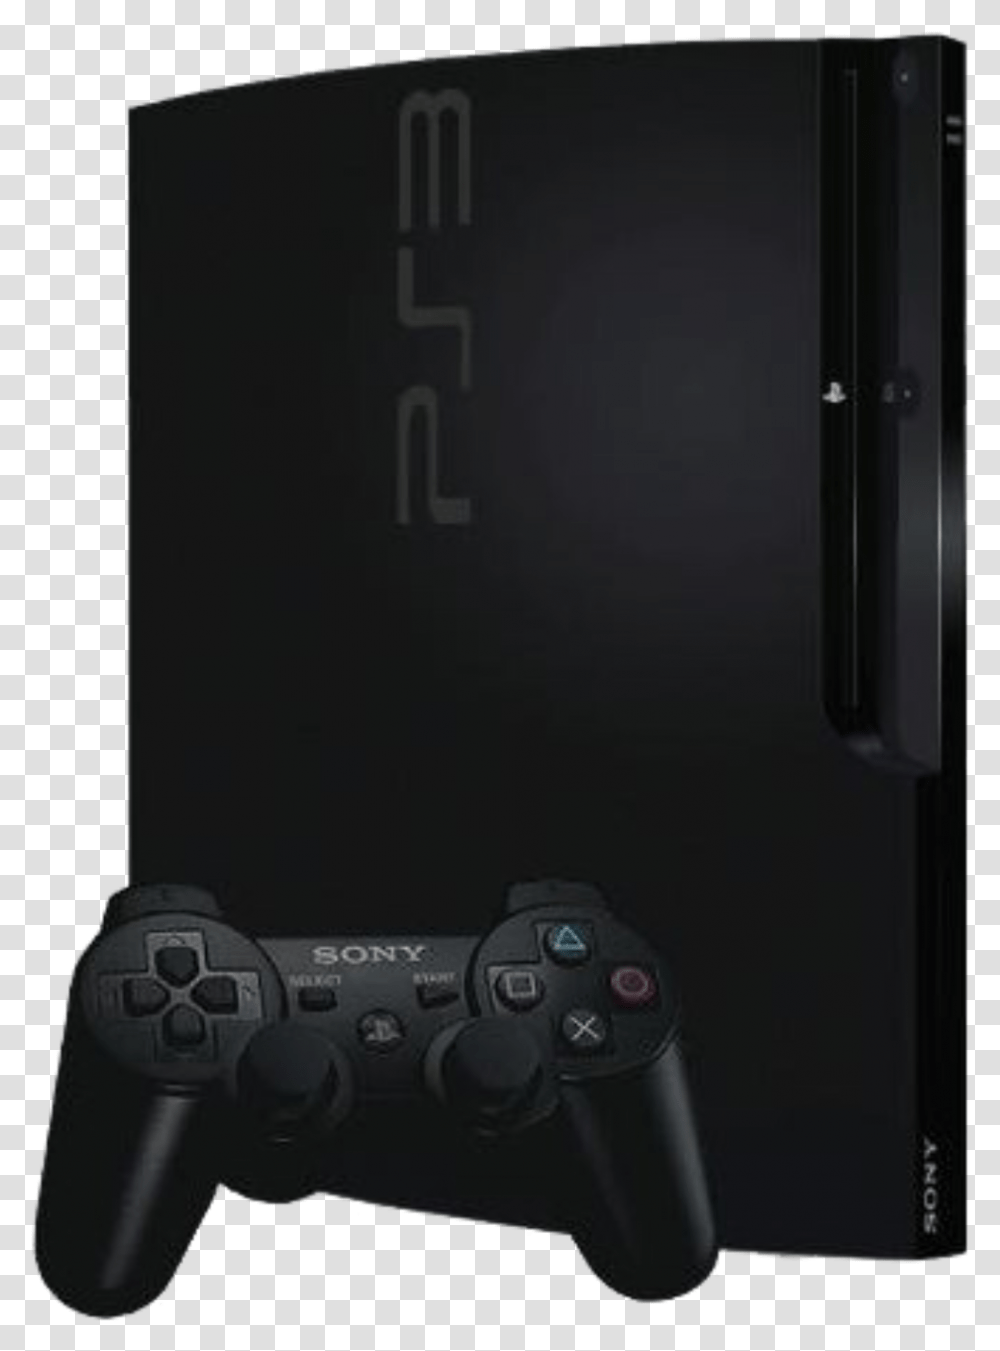 Sony Playstation 3 Slim Console Playstation 3 Slim, Electronics, Video Gaming, Appliance Transparent Png